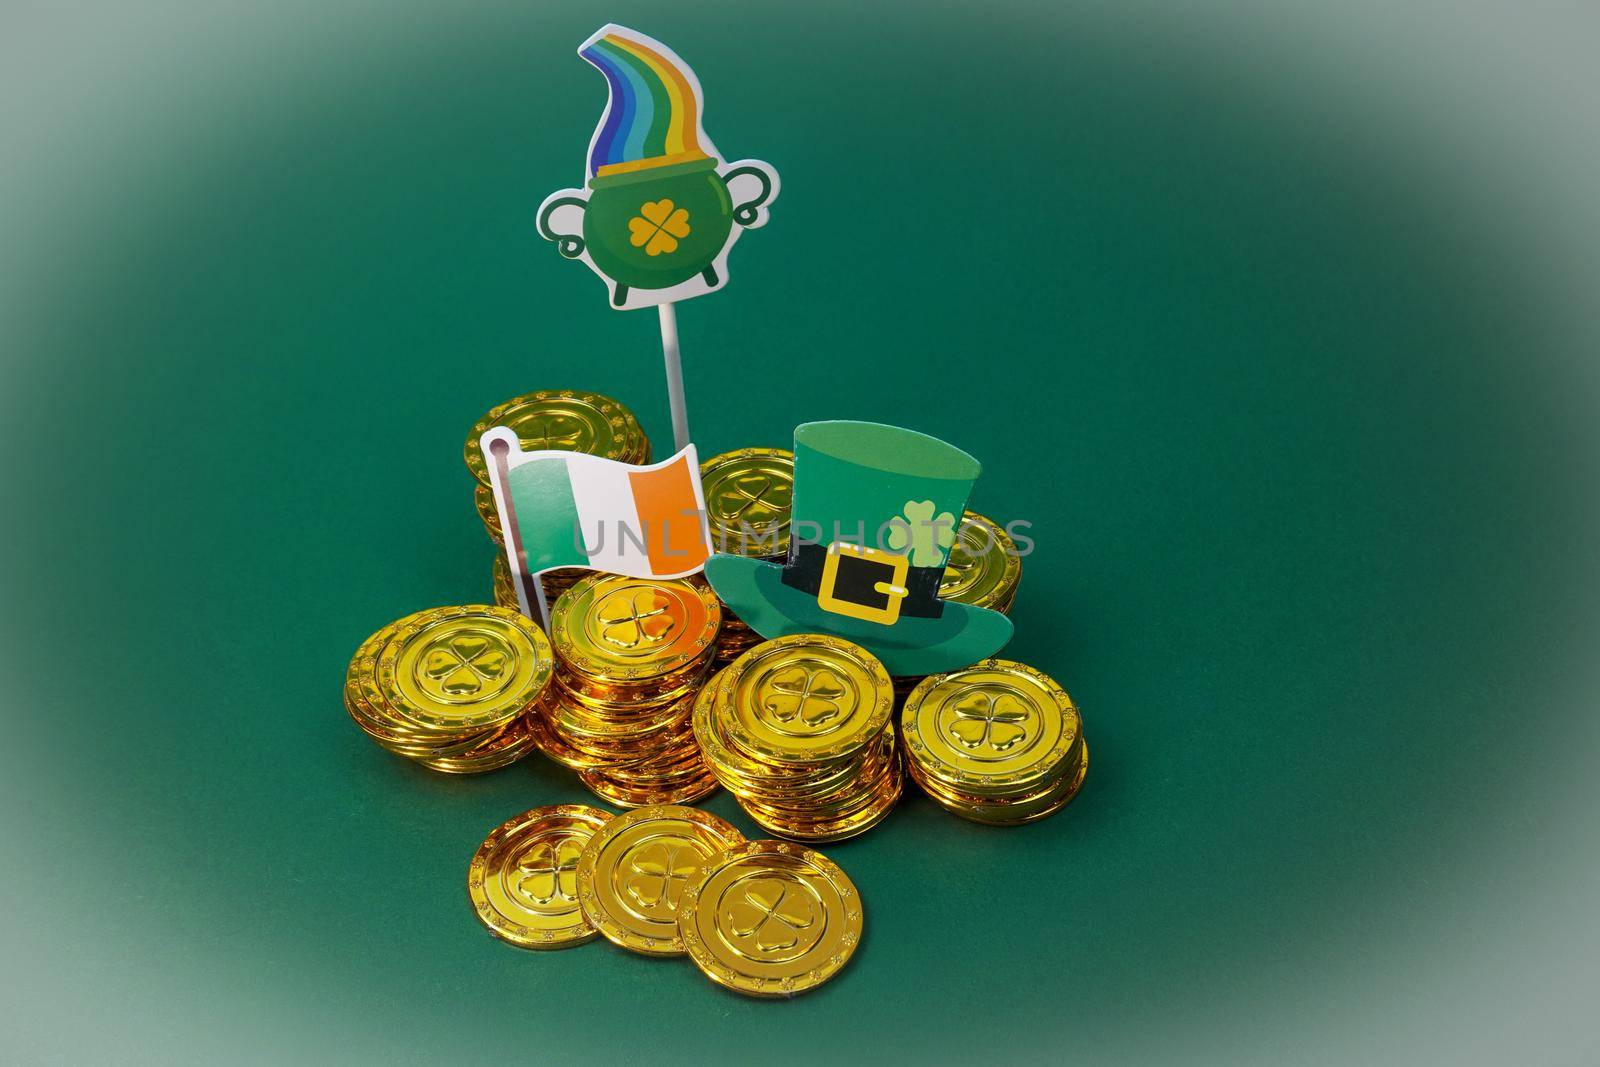 Items that are dedicated to St. Patrick's Day are laid out on the background. High quality photo